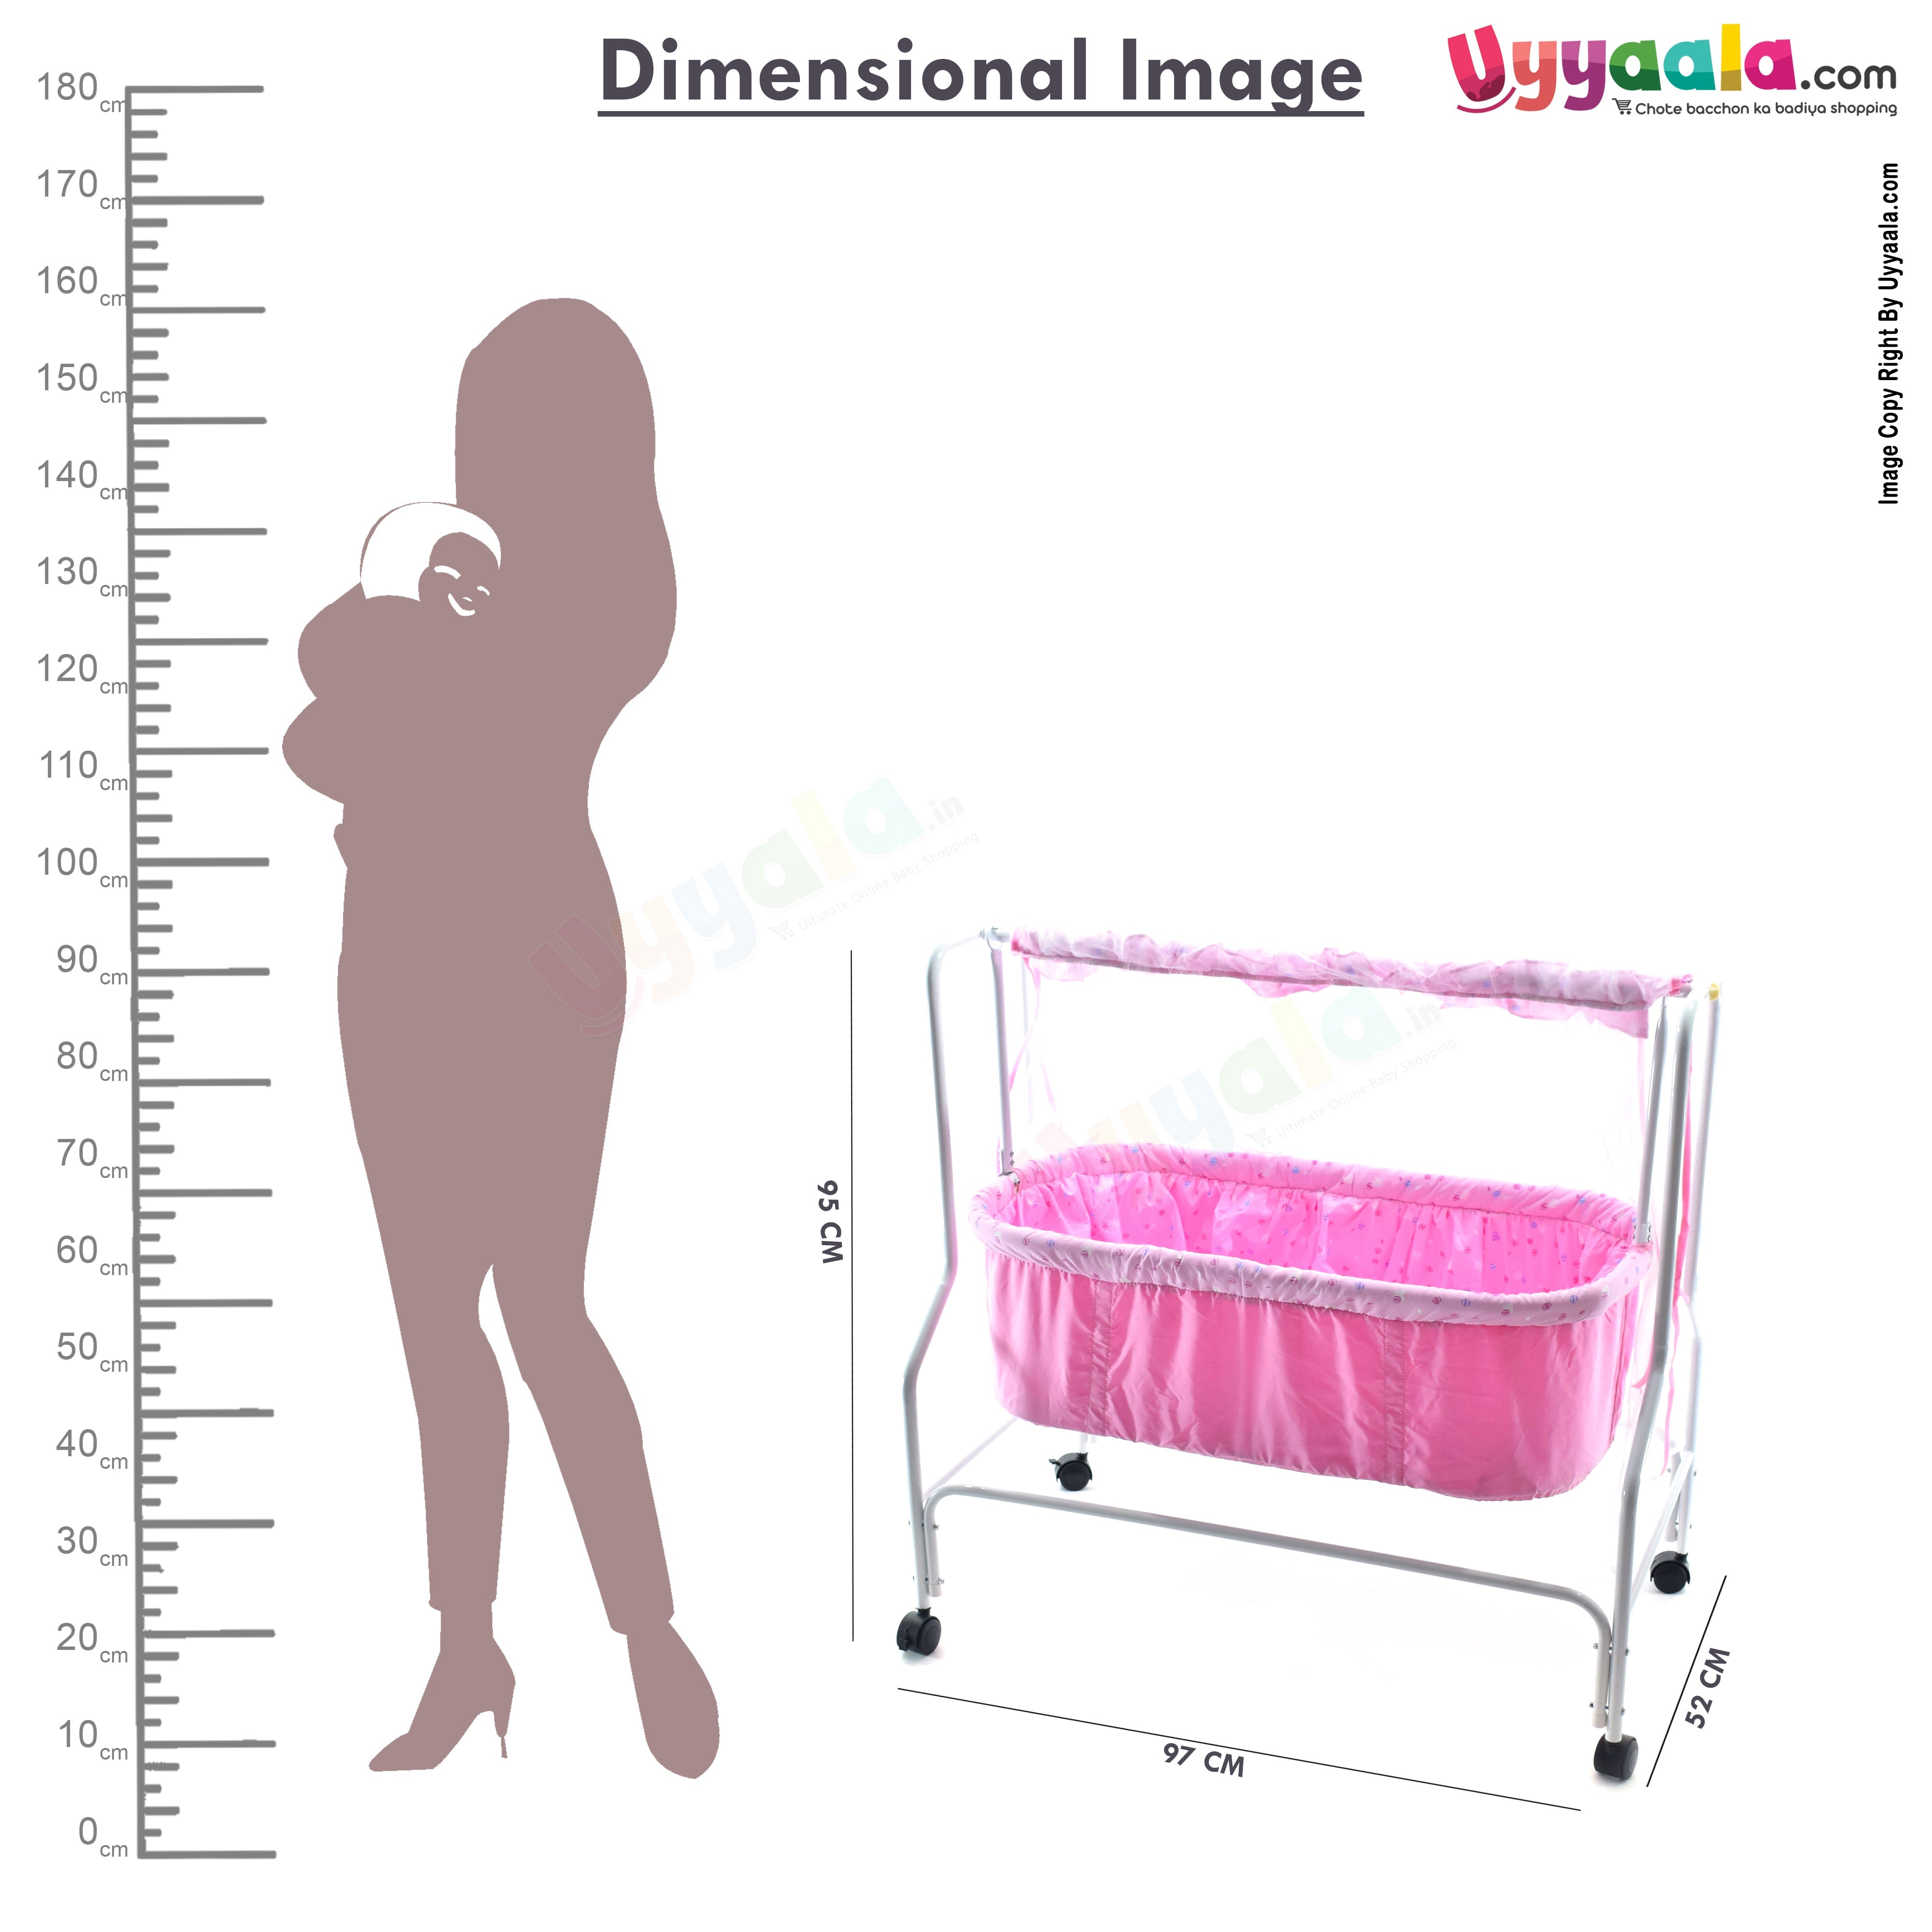 Baby Cradle With Mosquito Net Balls Print Pink